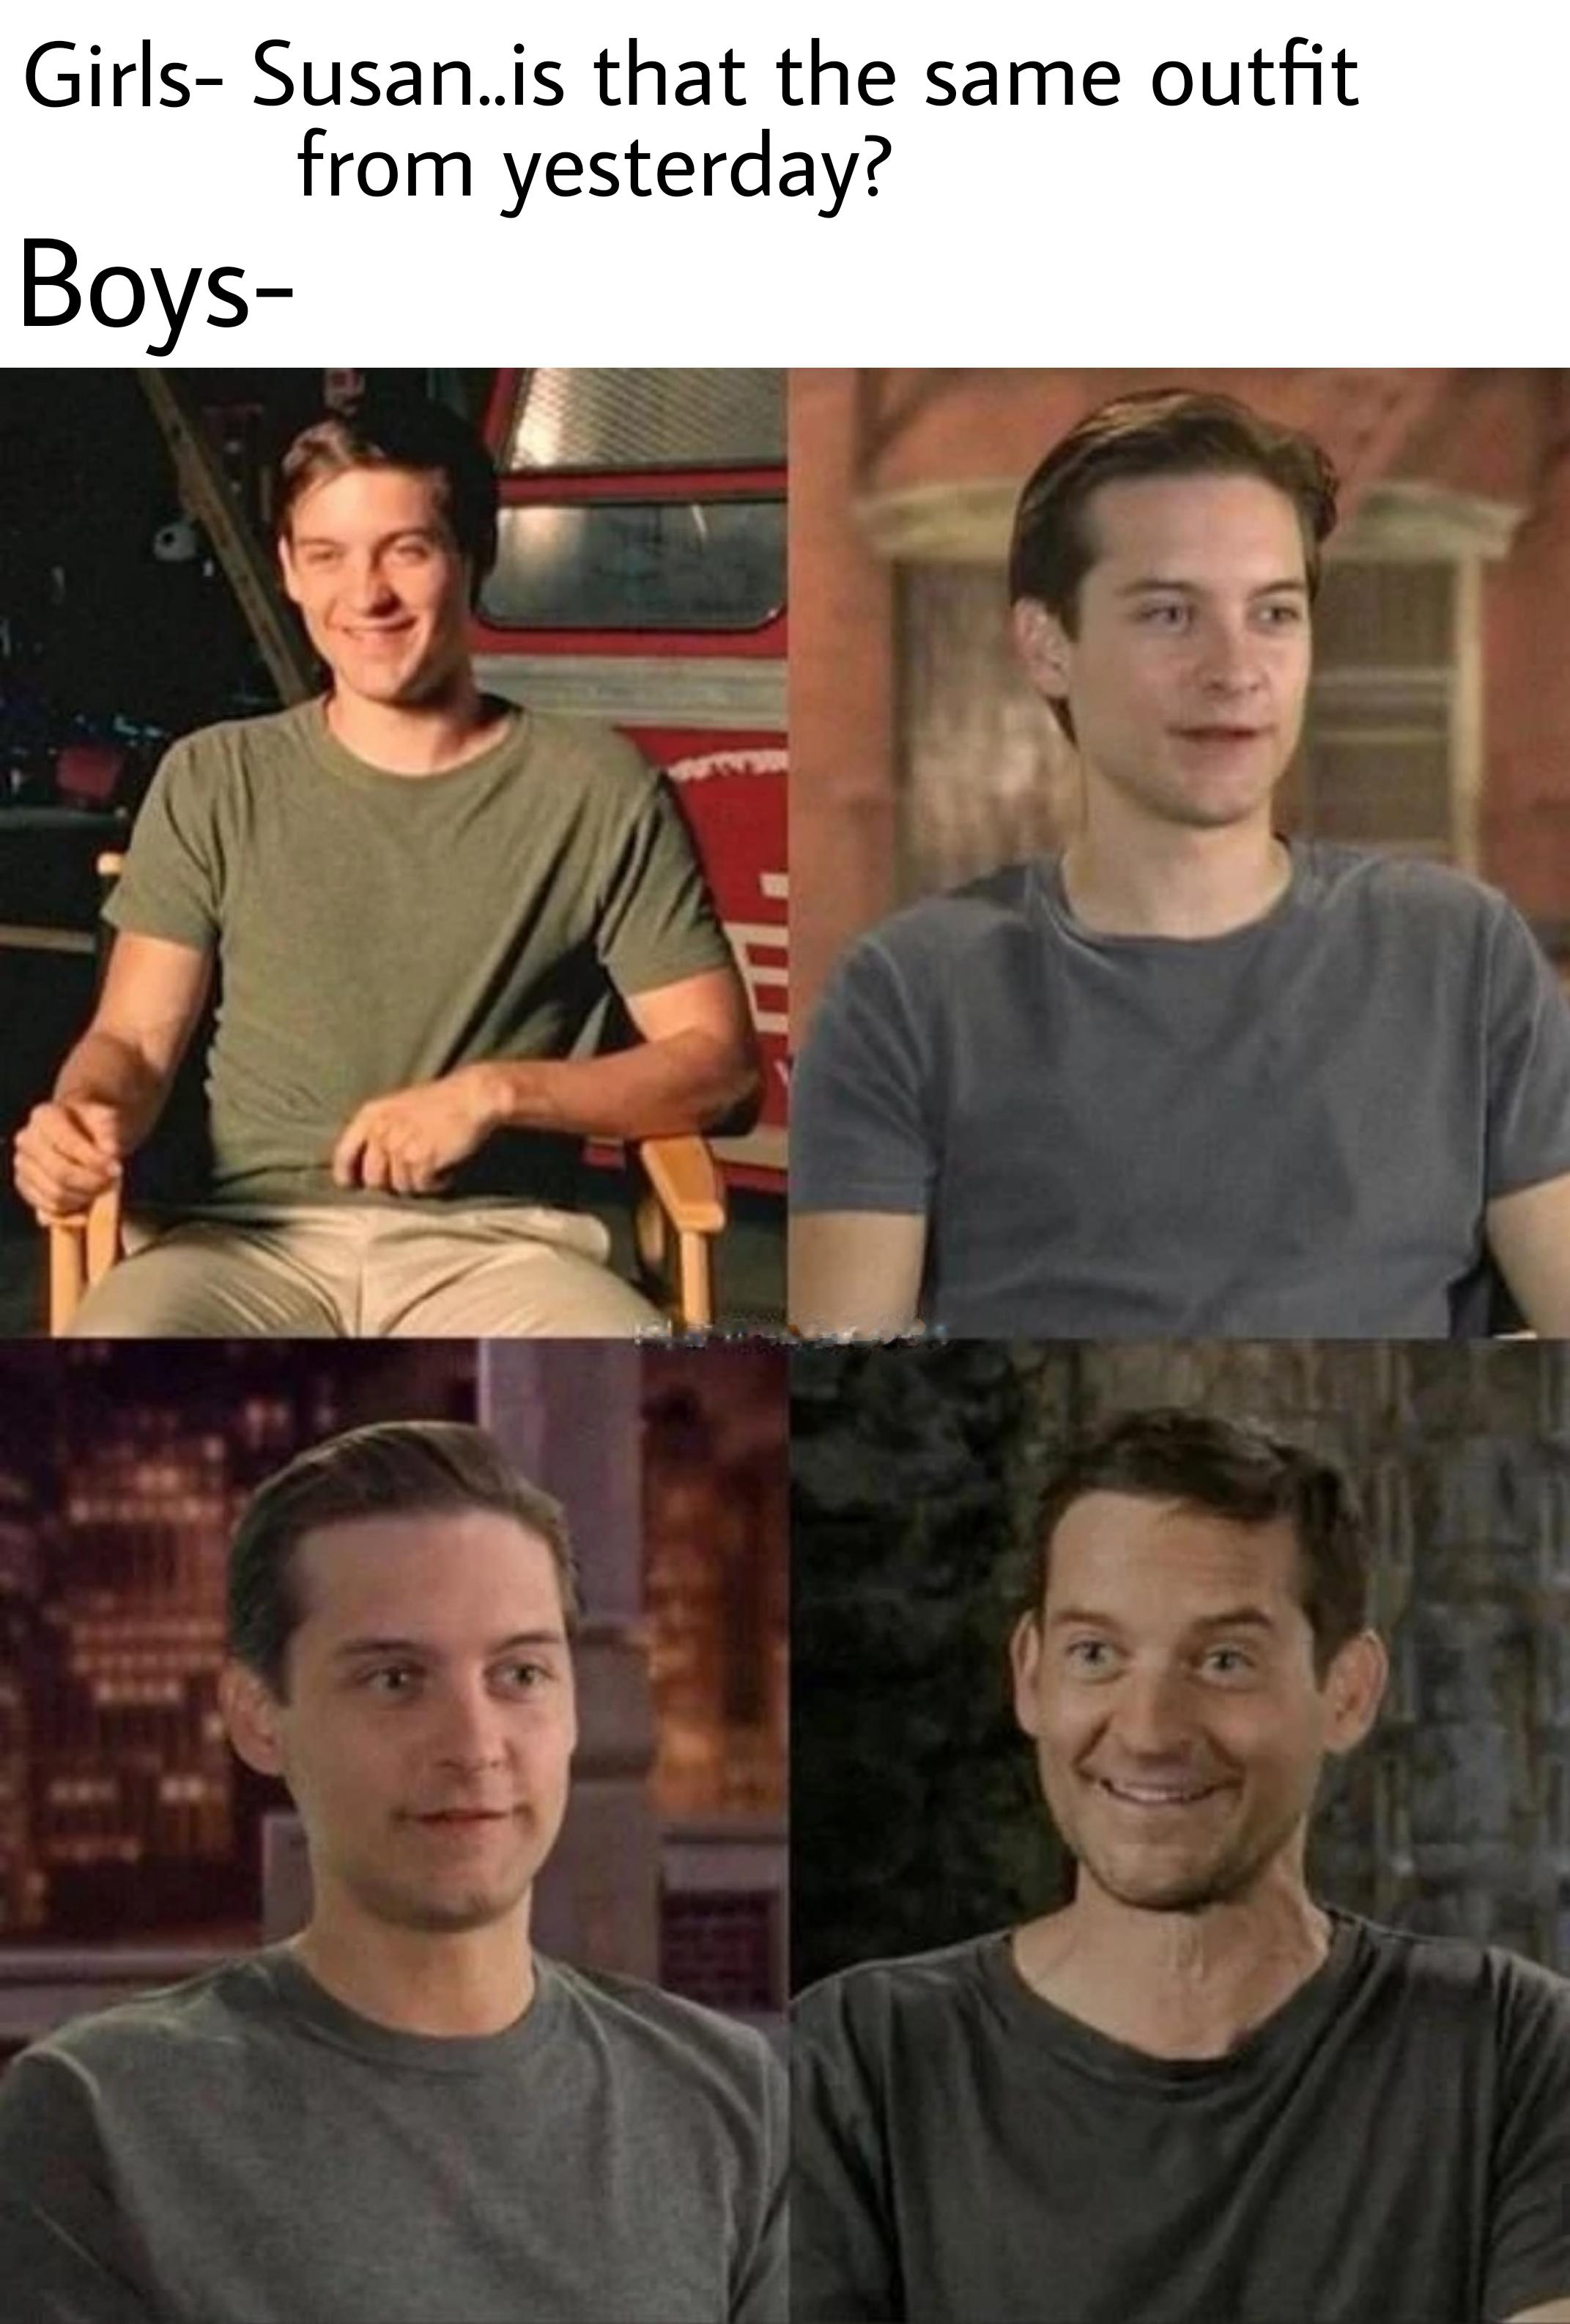 funny memes - dank memes - tobey maguire shirt meme - Girls Susan.is that the same outfit from yesterday? Boys